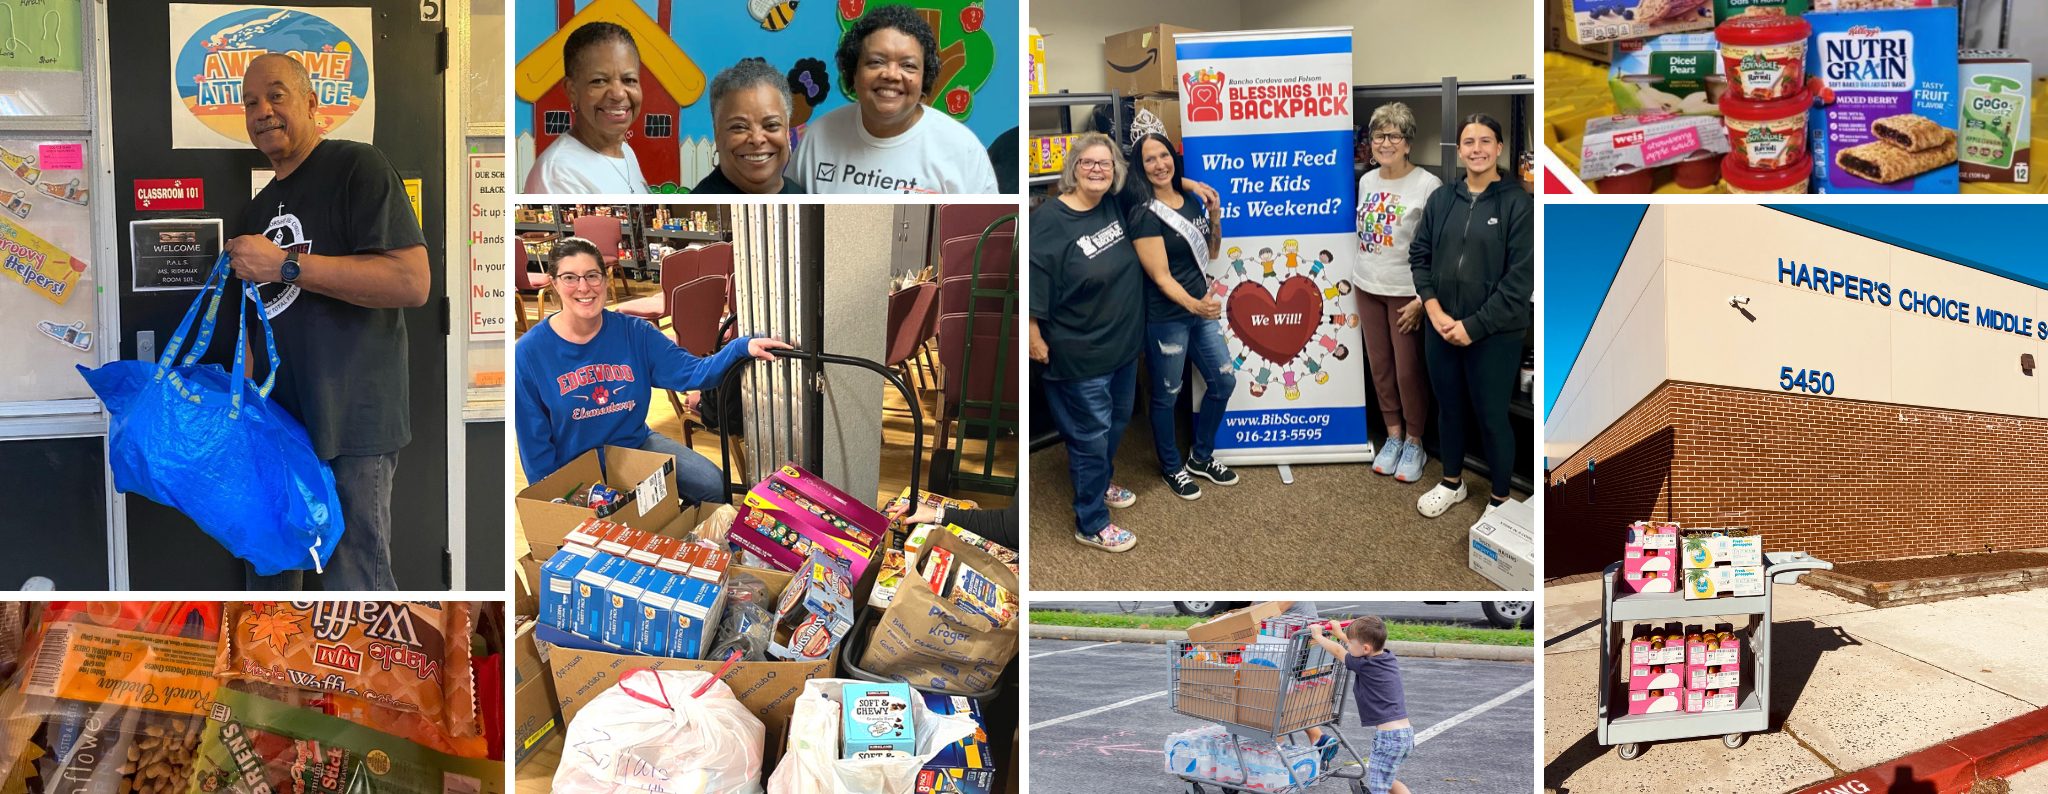 Blessings in a Backpack Programs Across the Country Gear Up for the School Year